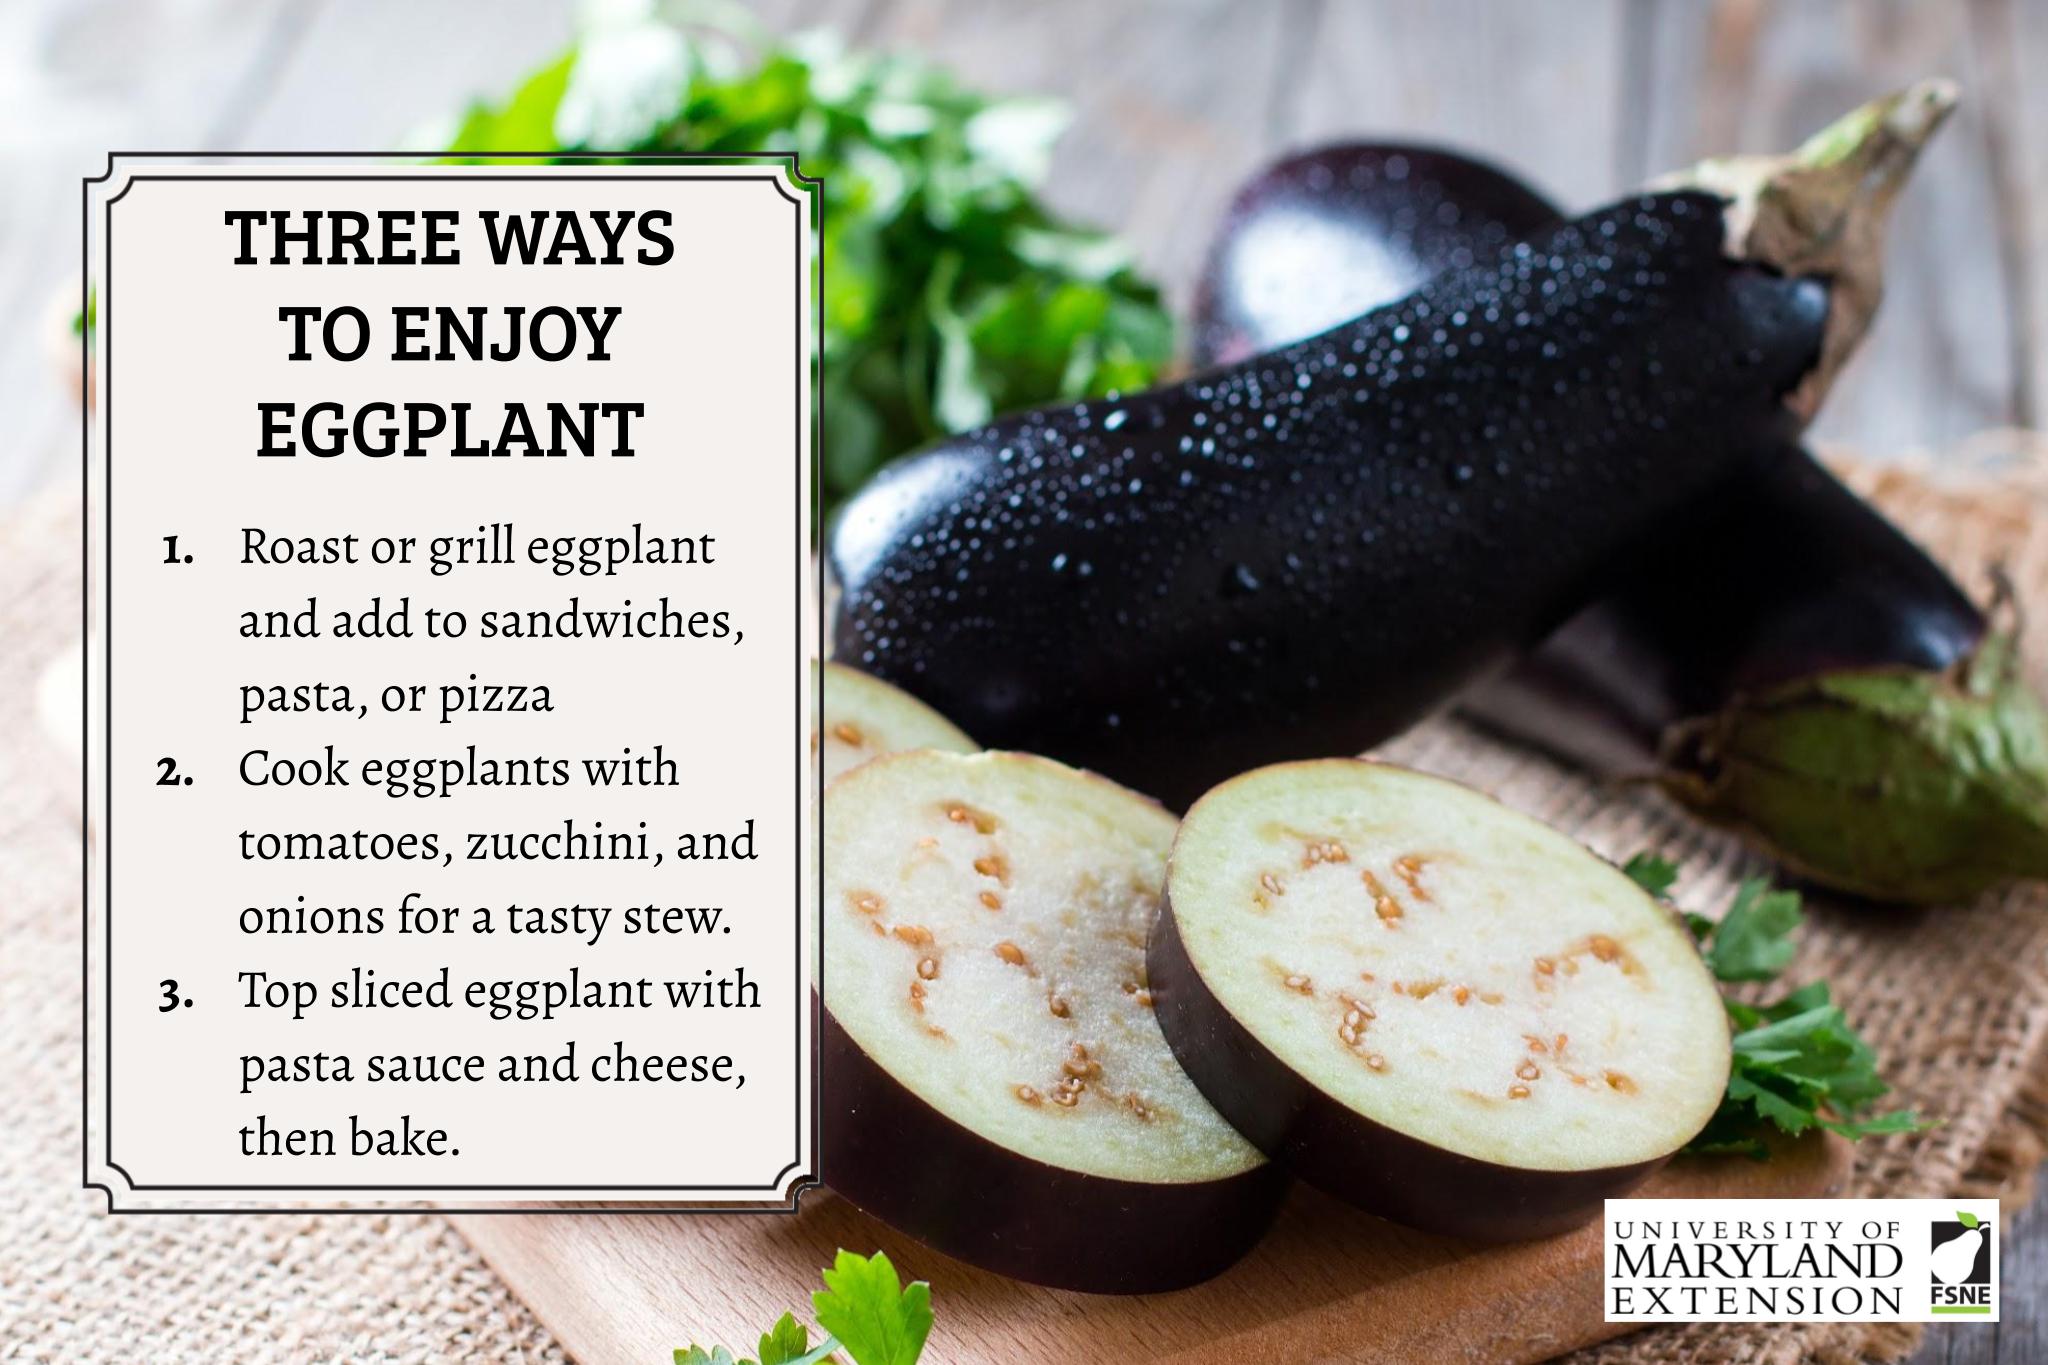 picture of eggplant sliced with how to prepare tips